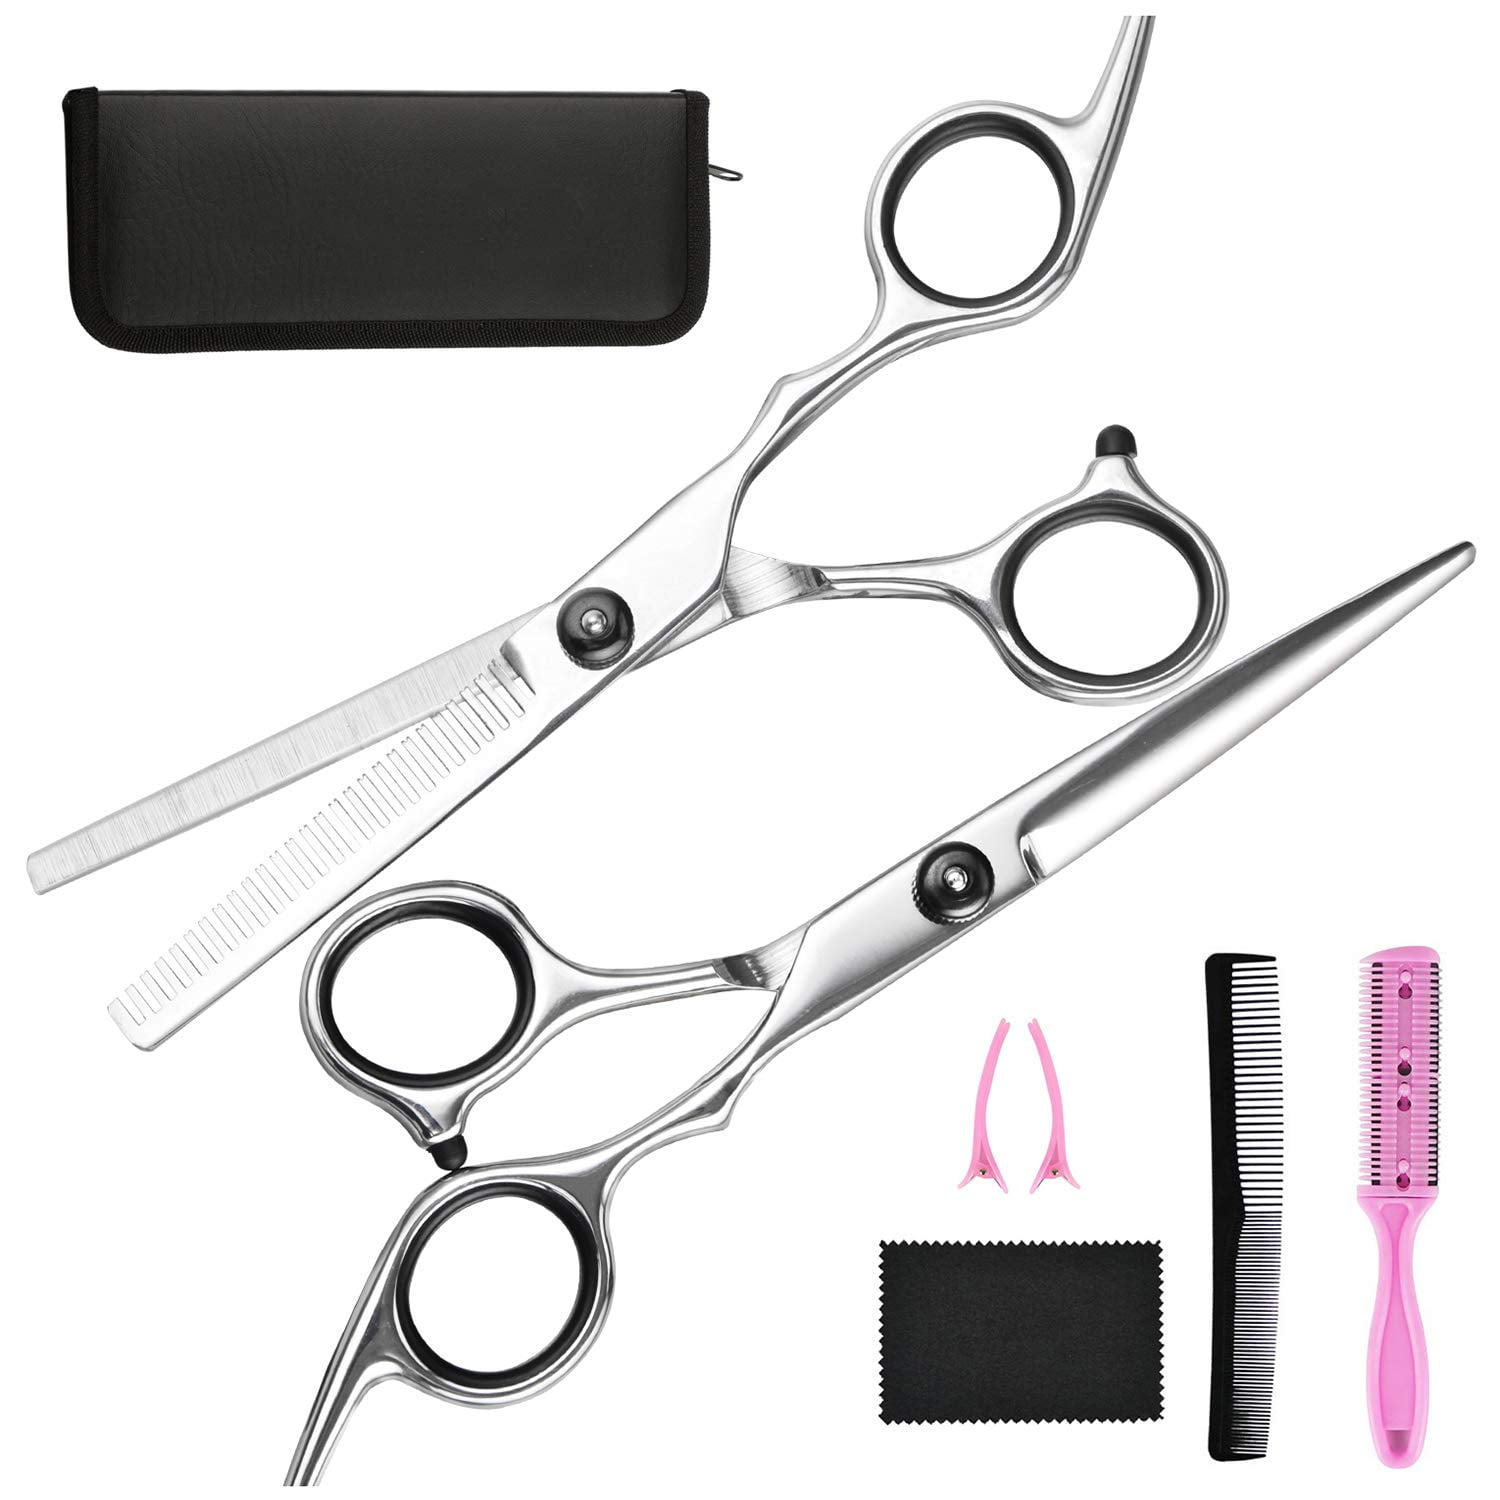 Chainplus 7 pcs Hair Cutting Scissors Set, Scissors Case, Barber Hair  Cutting Shears Hair Thinning/Texturizing Shears for Professional  Hairdresser or Home Use | Walmart Canada